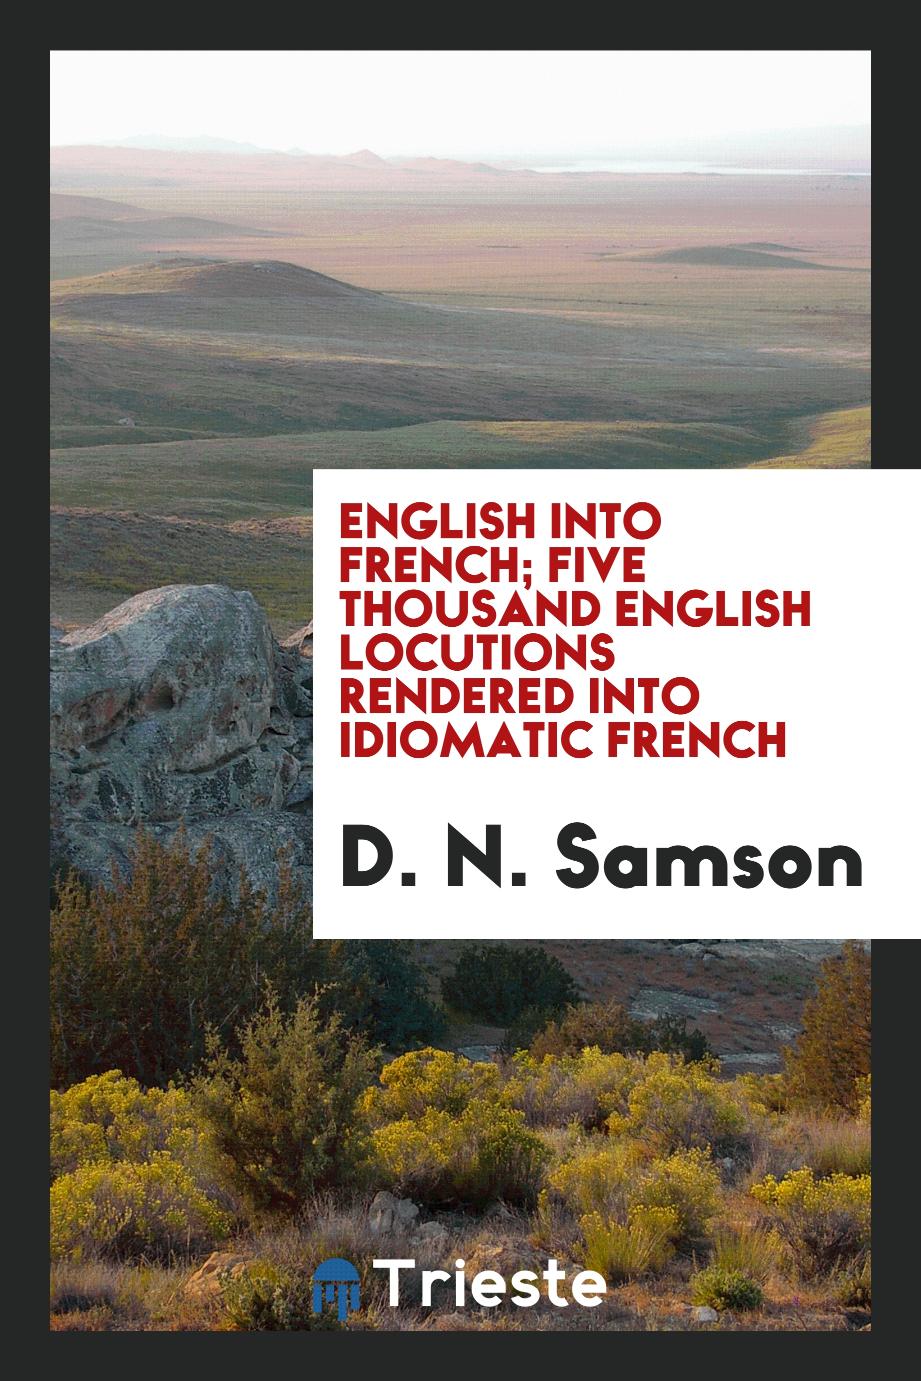 English into French; five thousand English locutions rendered into idiomatic French